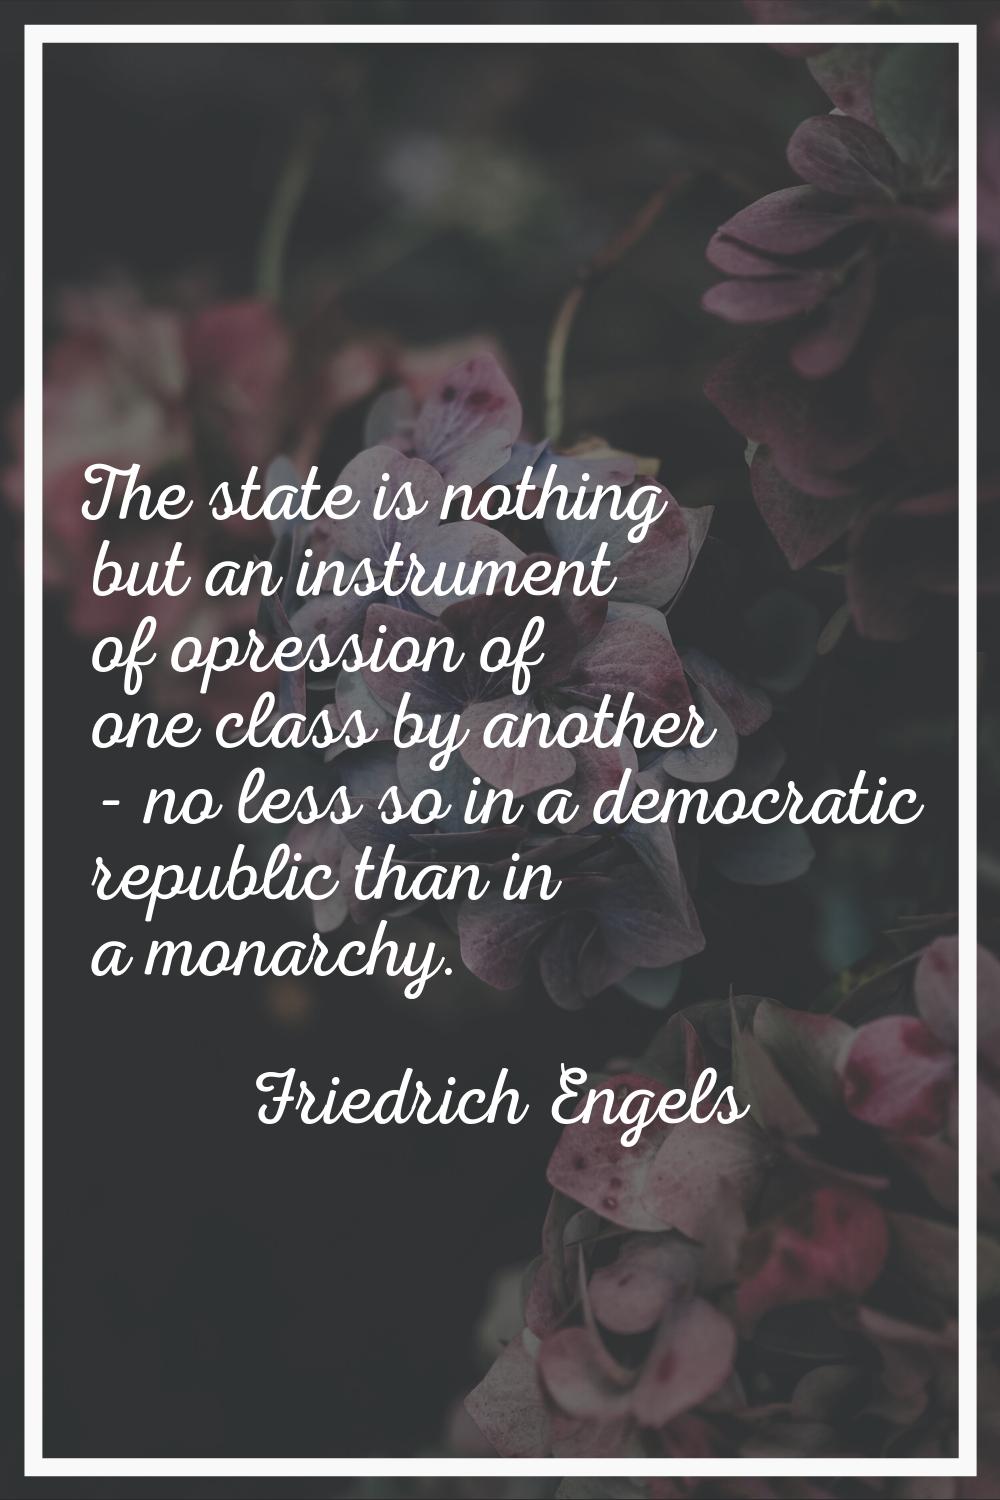 The state is nothing but an instrument of opression of one class by another - no less so in a democ